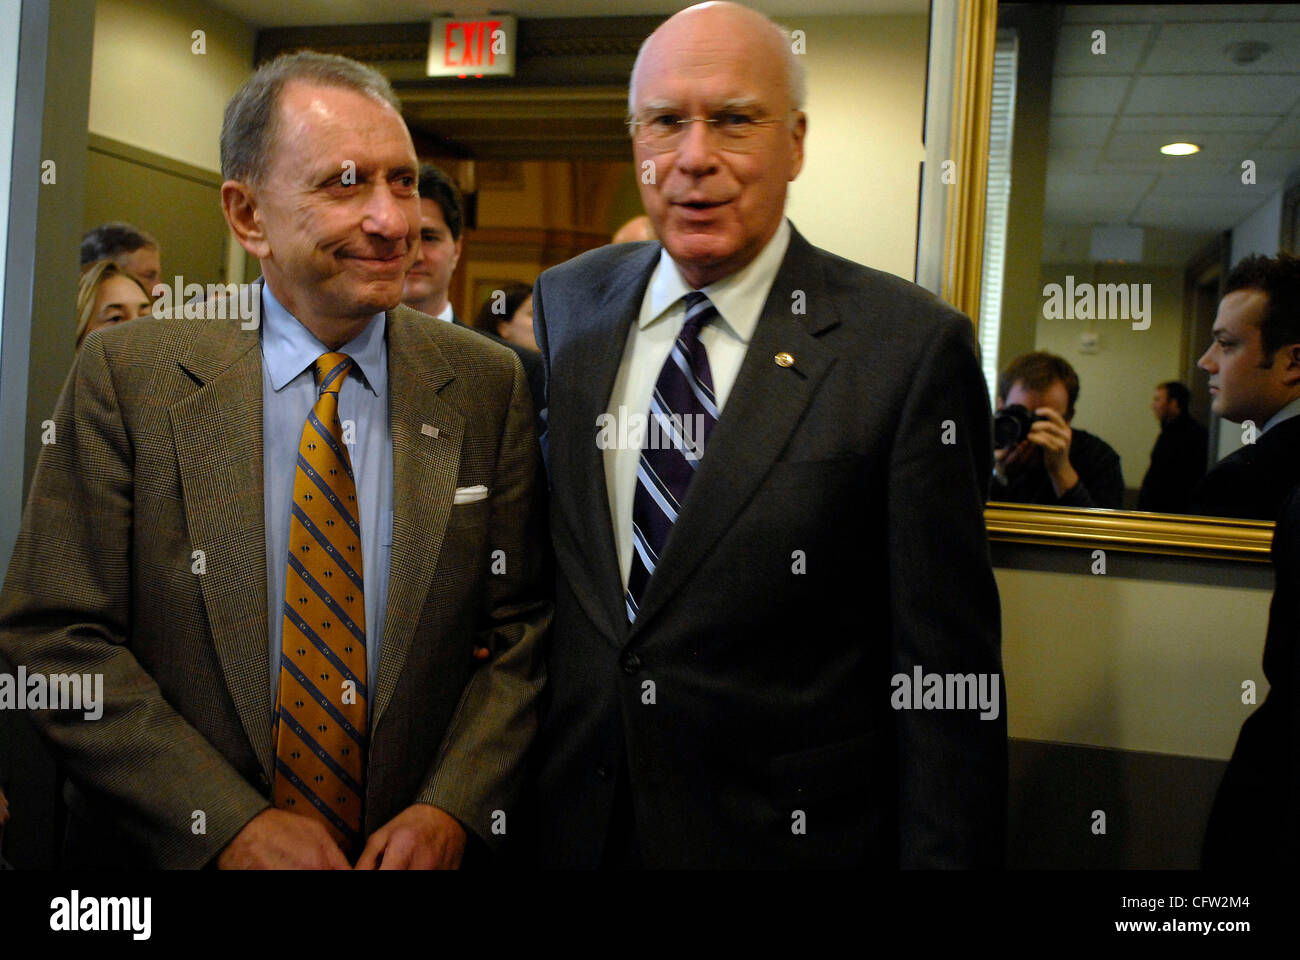 Feb 01, 2007 - Washington, DC, USA - Senate Judiciary Committee chairmen ARLEN SPECTER (R-PA) and PATRICK LEAHY (D-VT) arrive at a press conference to discuss their meeting with the Justice Department about the Maher Arar case. Arar is a Canadian citizen who was detained and sent to Syria by the Uni Stock Photo